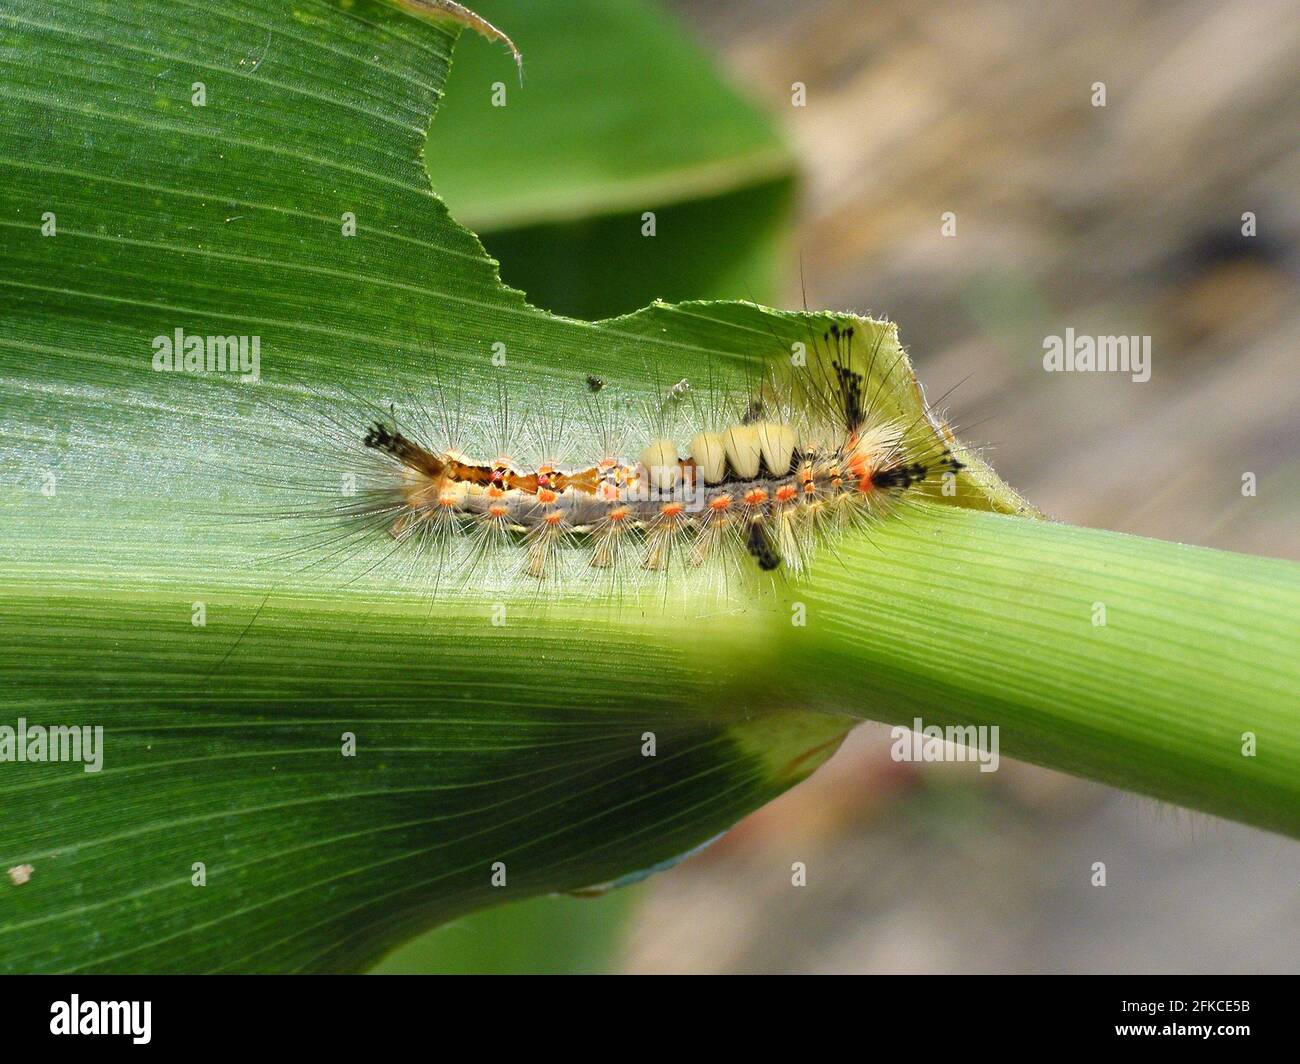 Caterpillar of Orgyia antiqua the rusty tussock moth or vapourer on damaged leaves of corn plants. It is a moth in the family Erebidae. Stock Photo